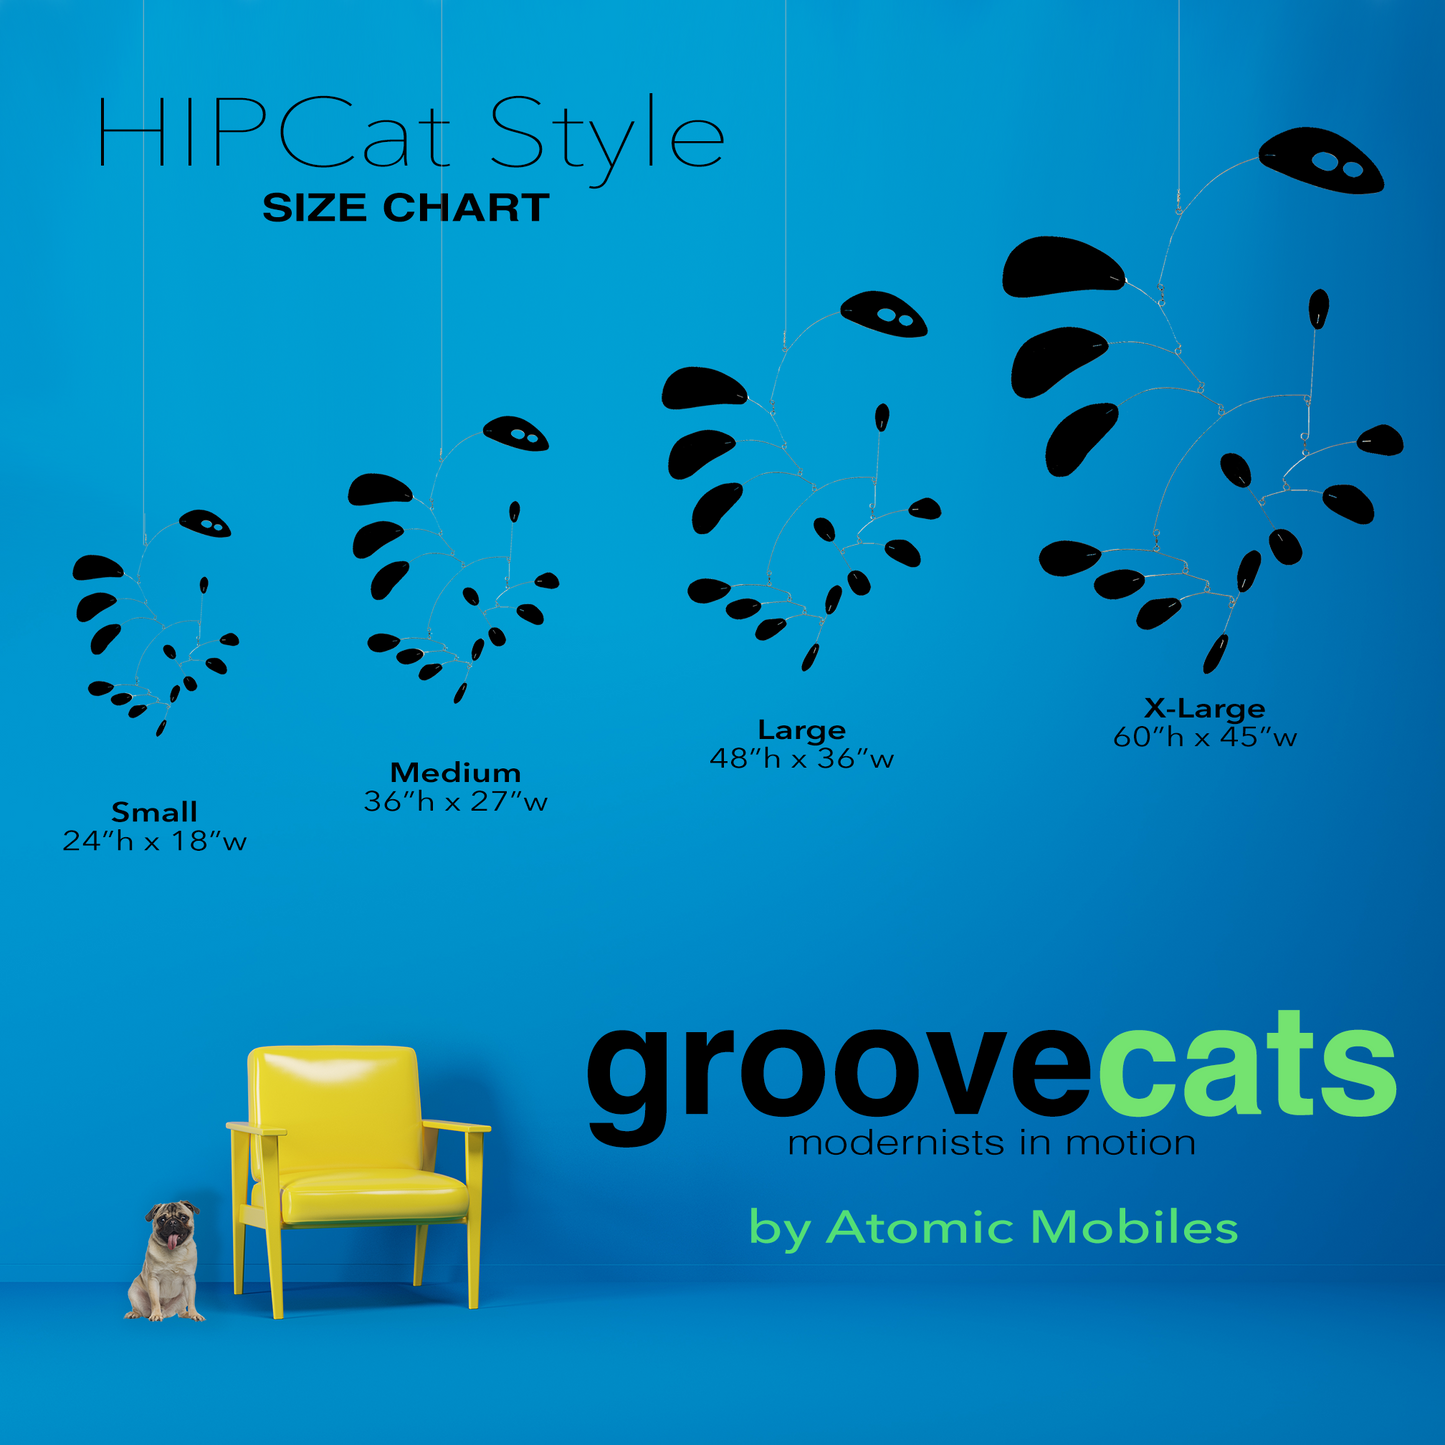 Size Chart for GrooveCats hanging art mobile in HipCat Style with yellow chair and cute pug dog- handmade mid century modern kinetic art by AtomicMobiles.com